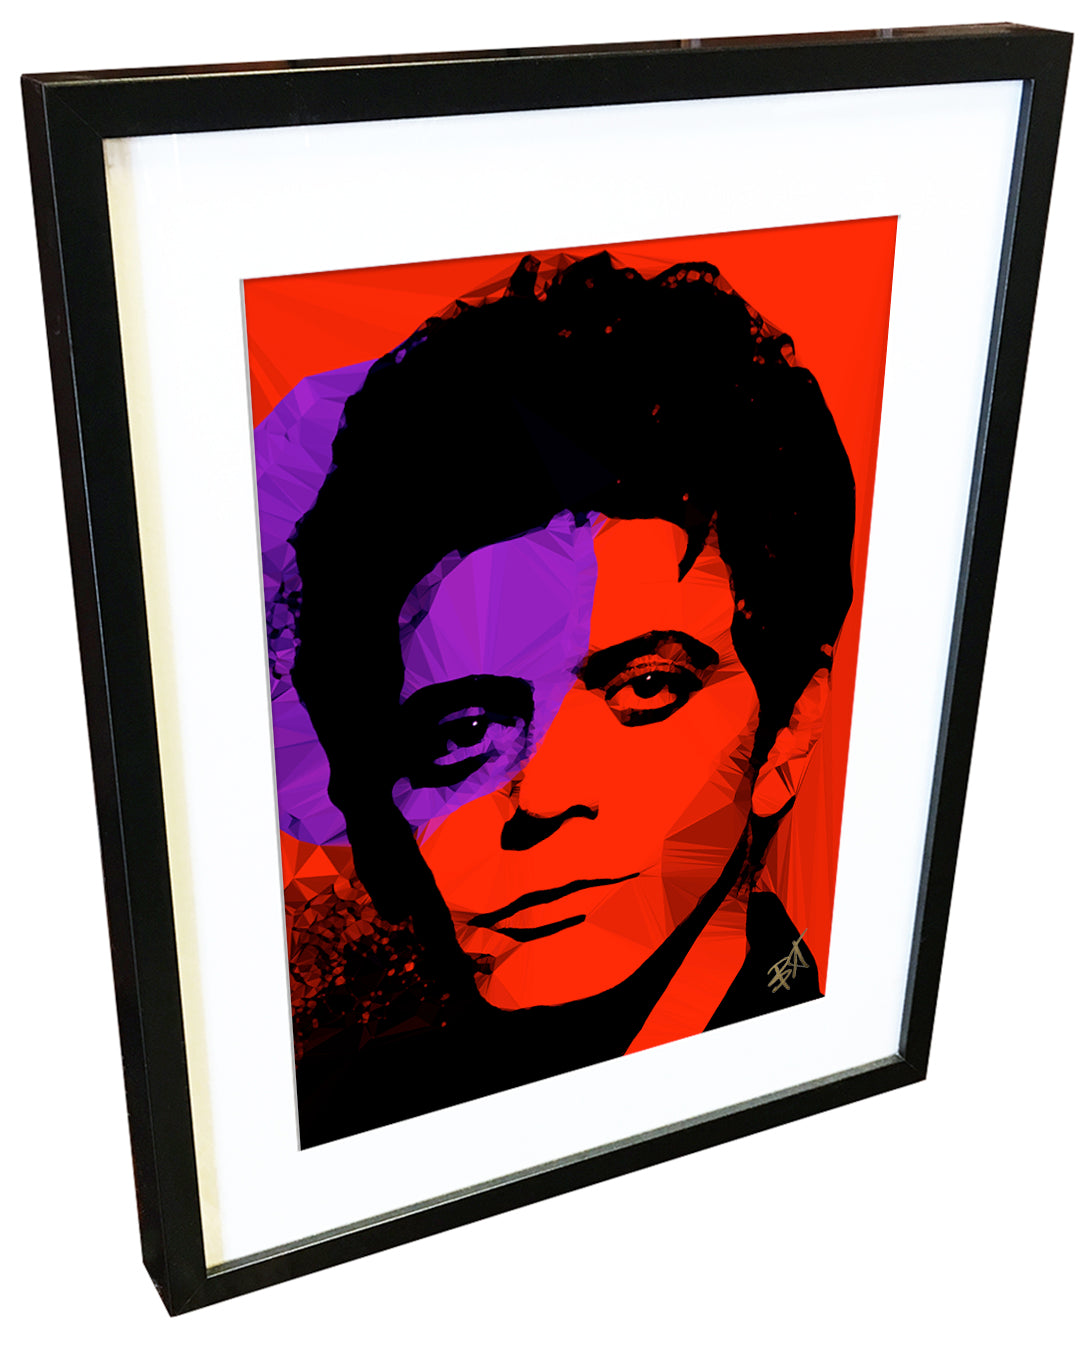 Lou Reed #1 by Baiba Auria - signed art print - Egoiste Gallery - Art Gallery in Manchester City Centre